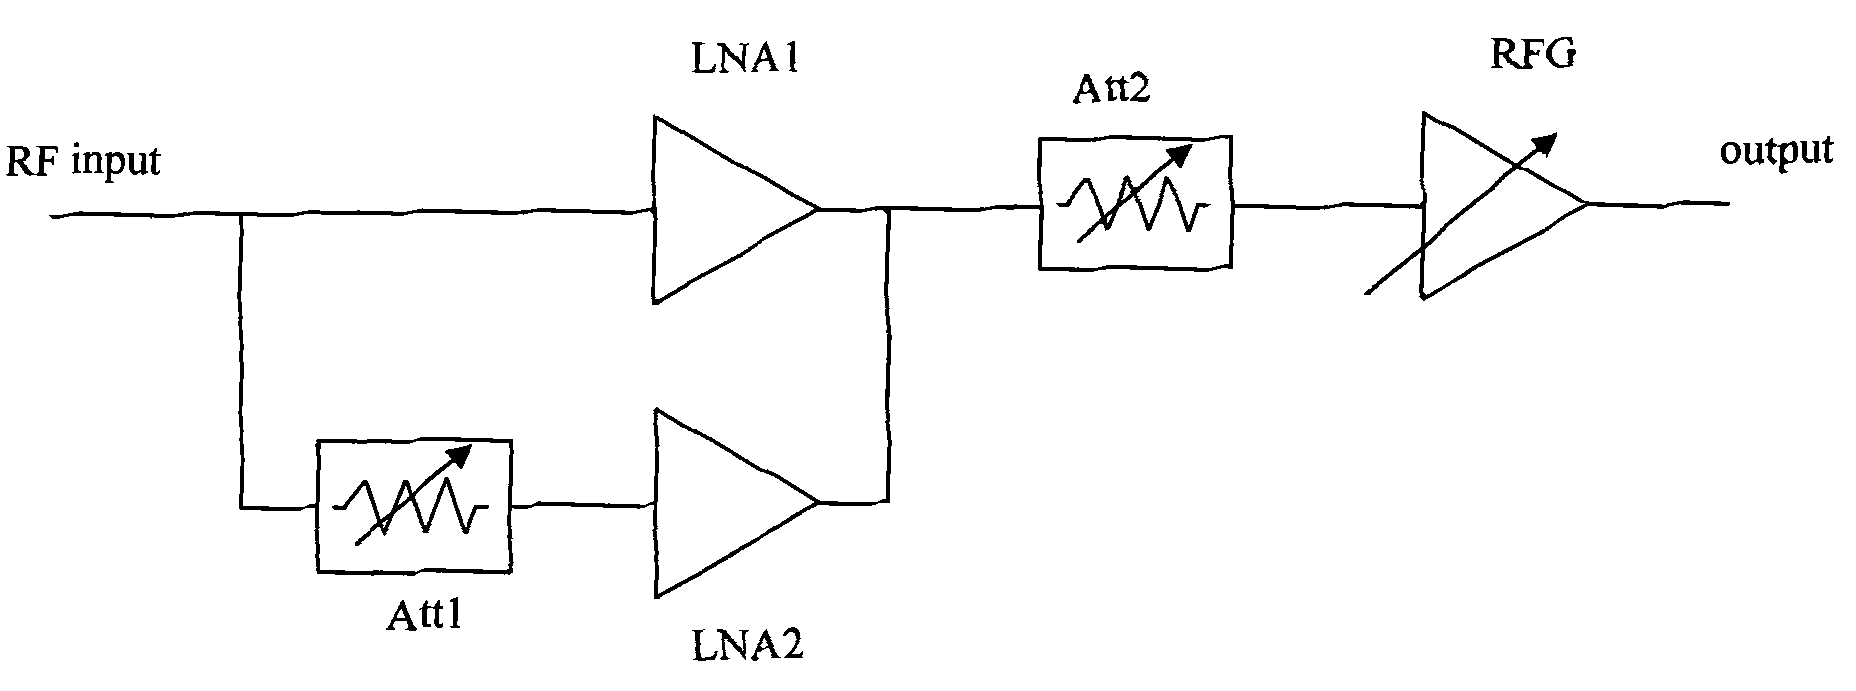 Method for controlling gain and attenuation of broadband low-noise amplifier